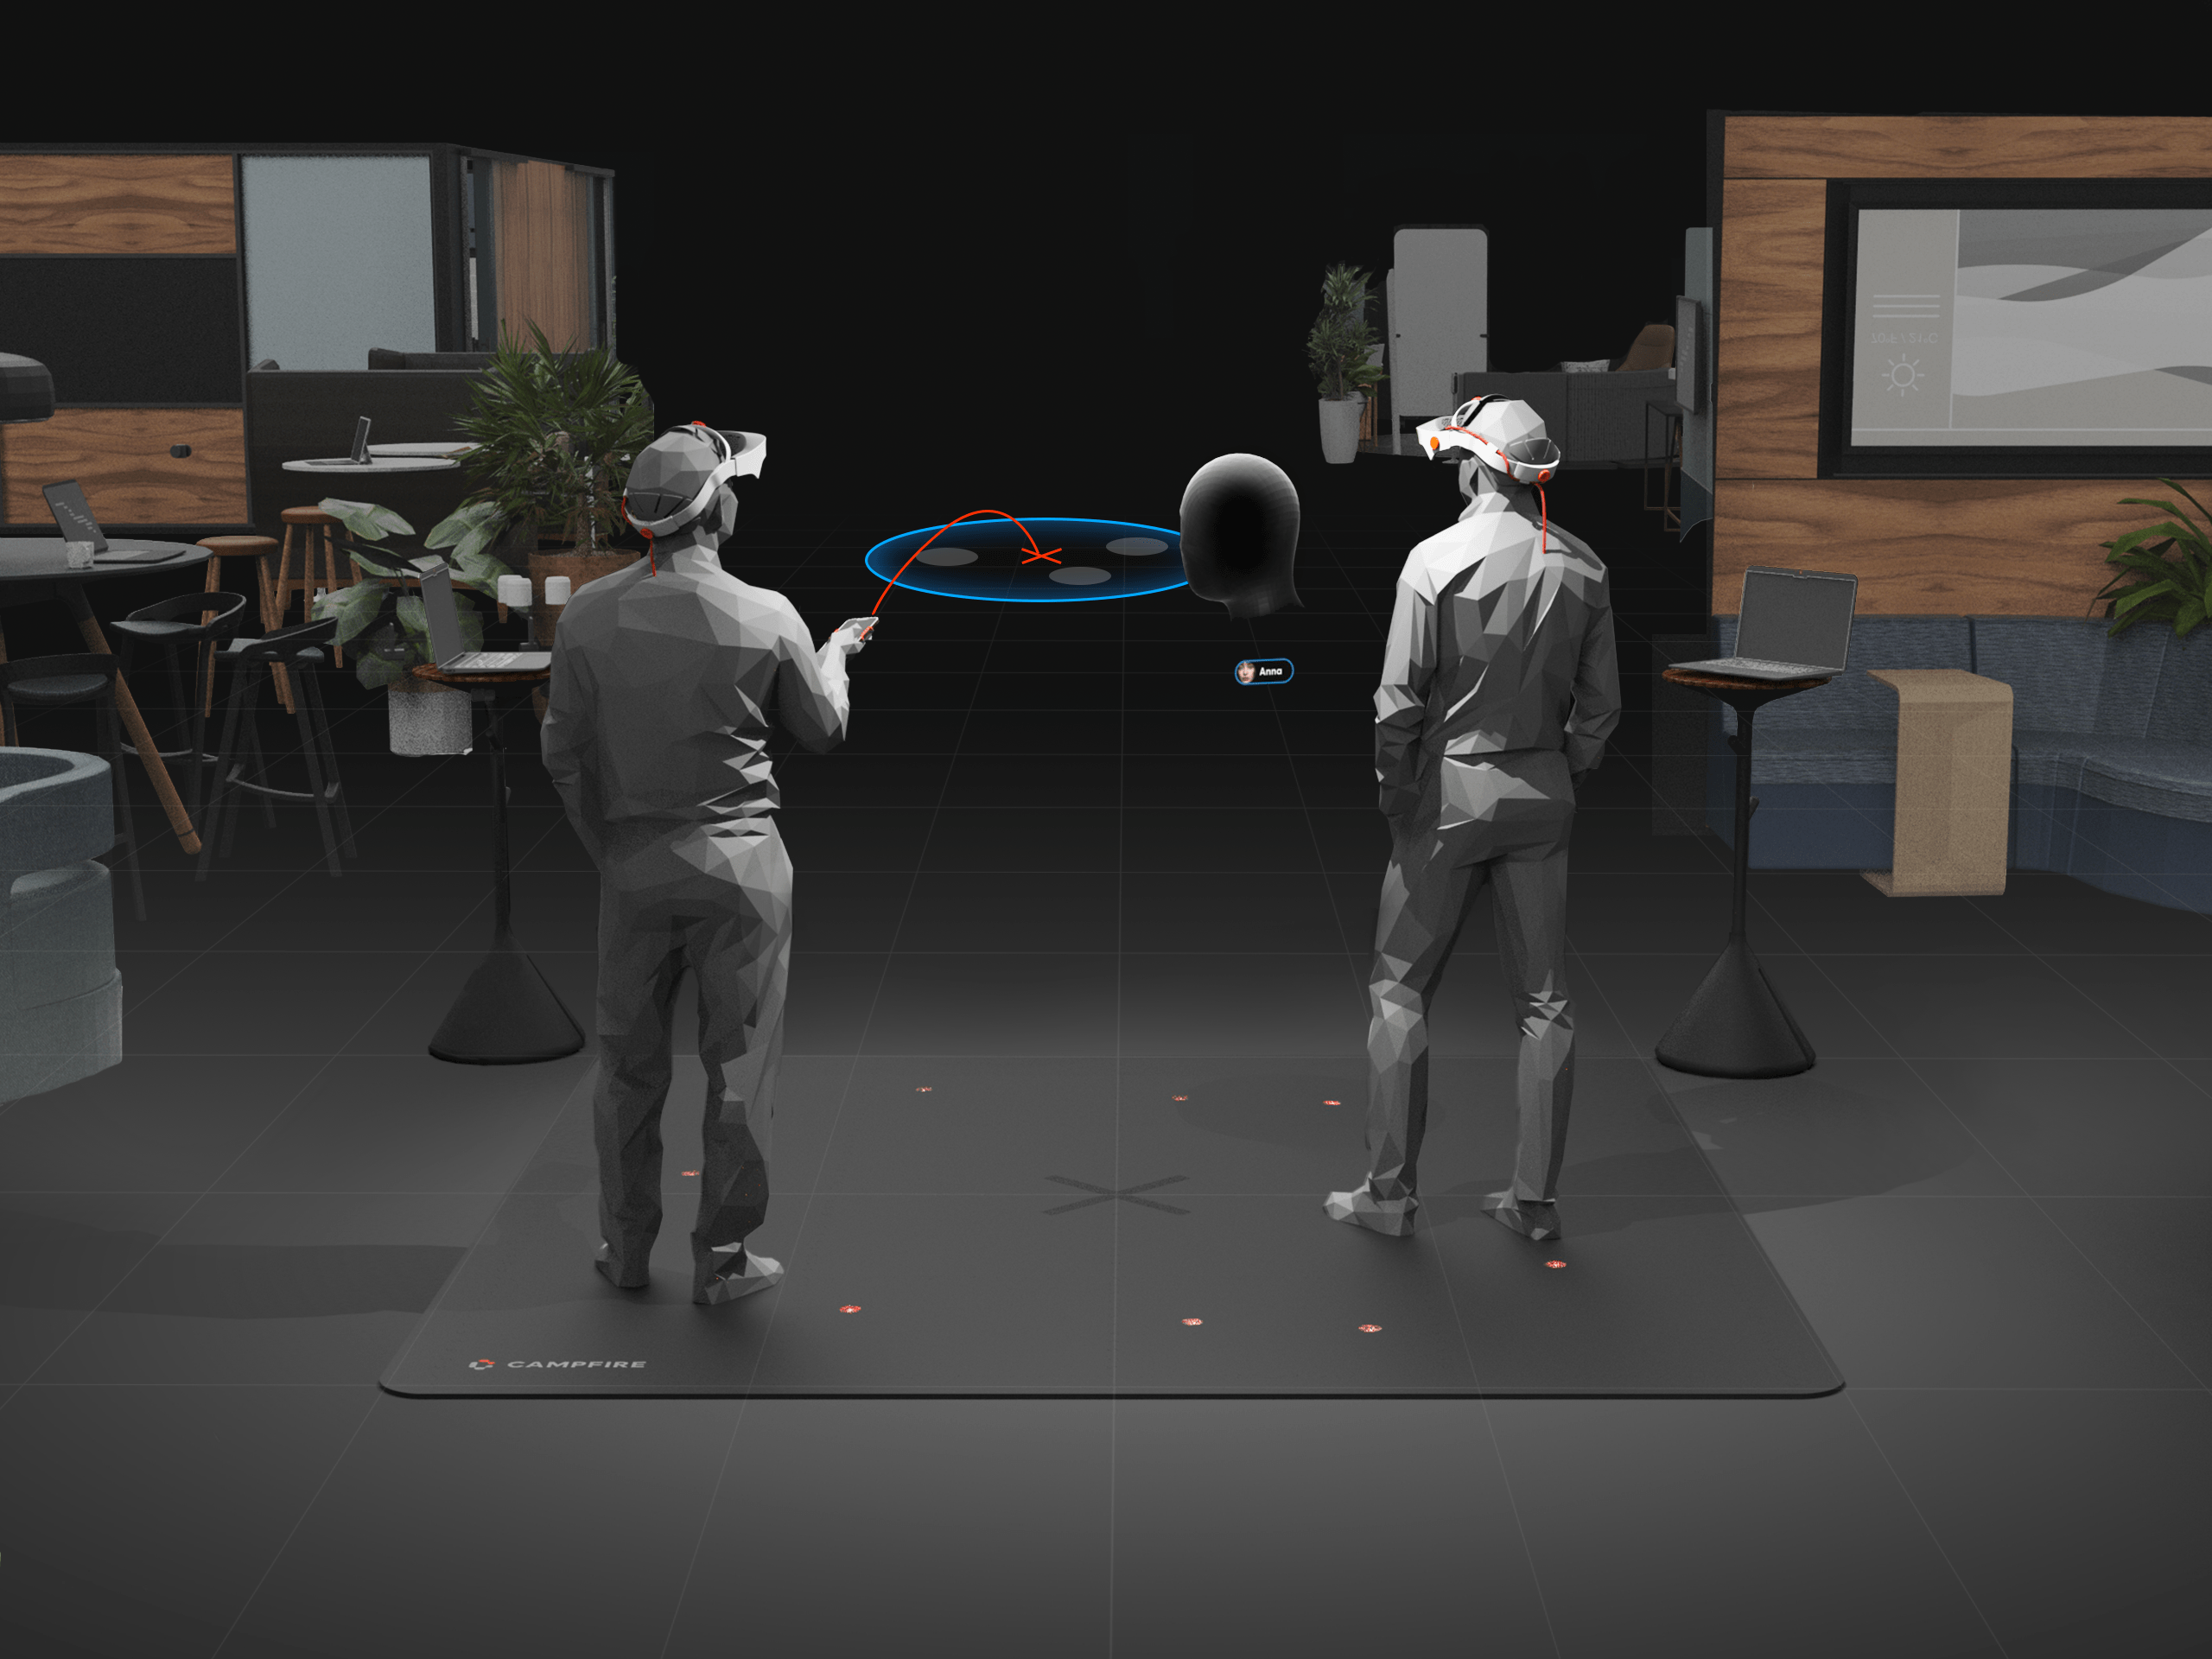 Campfire brings 3D collaboration with AR headsets to large spaces